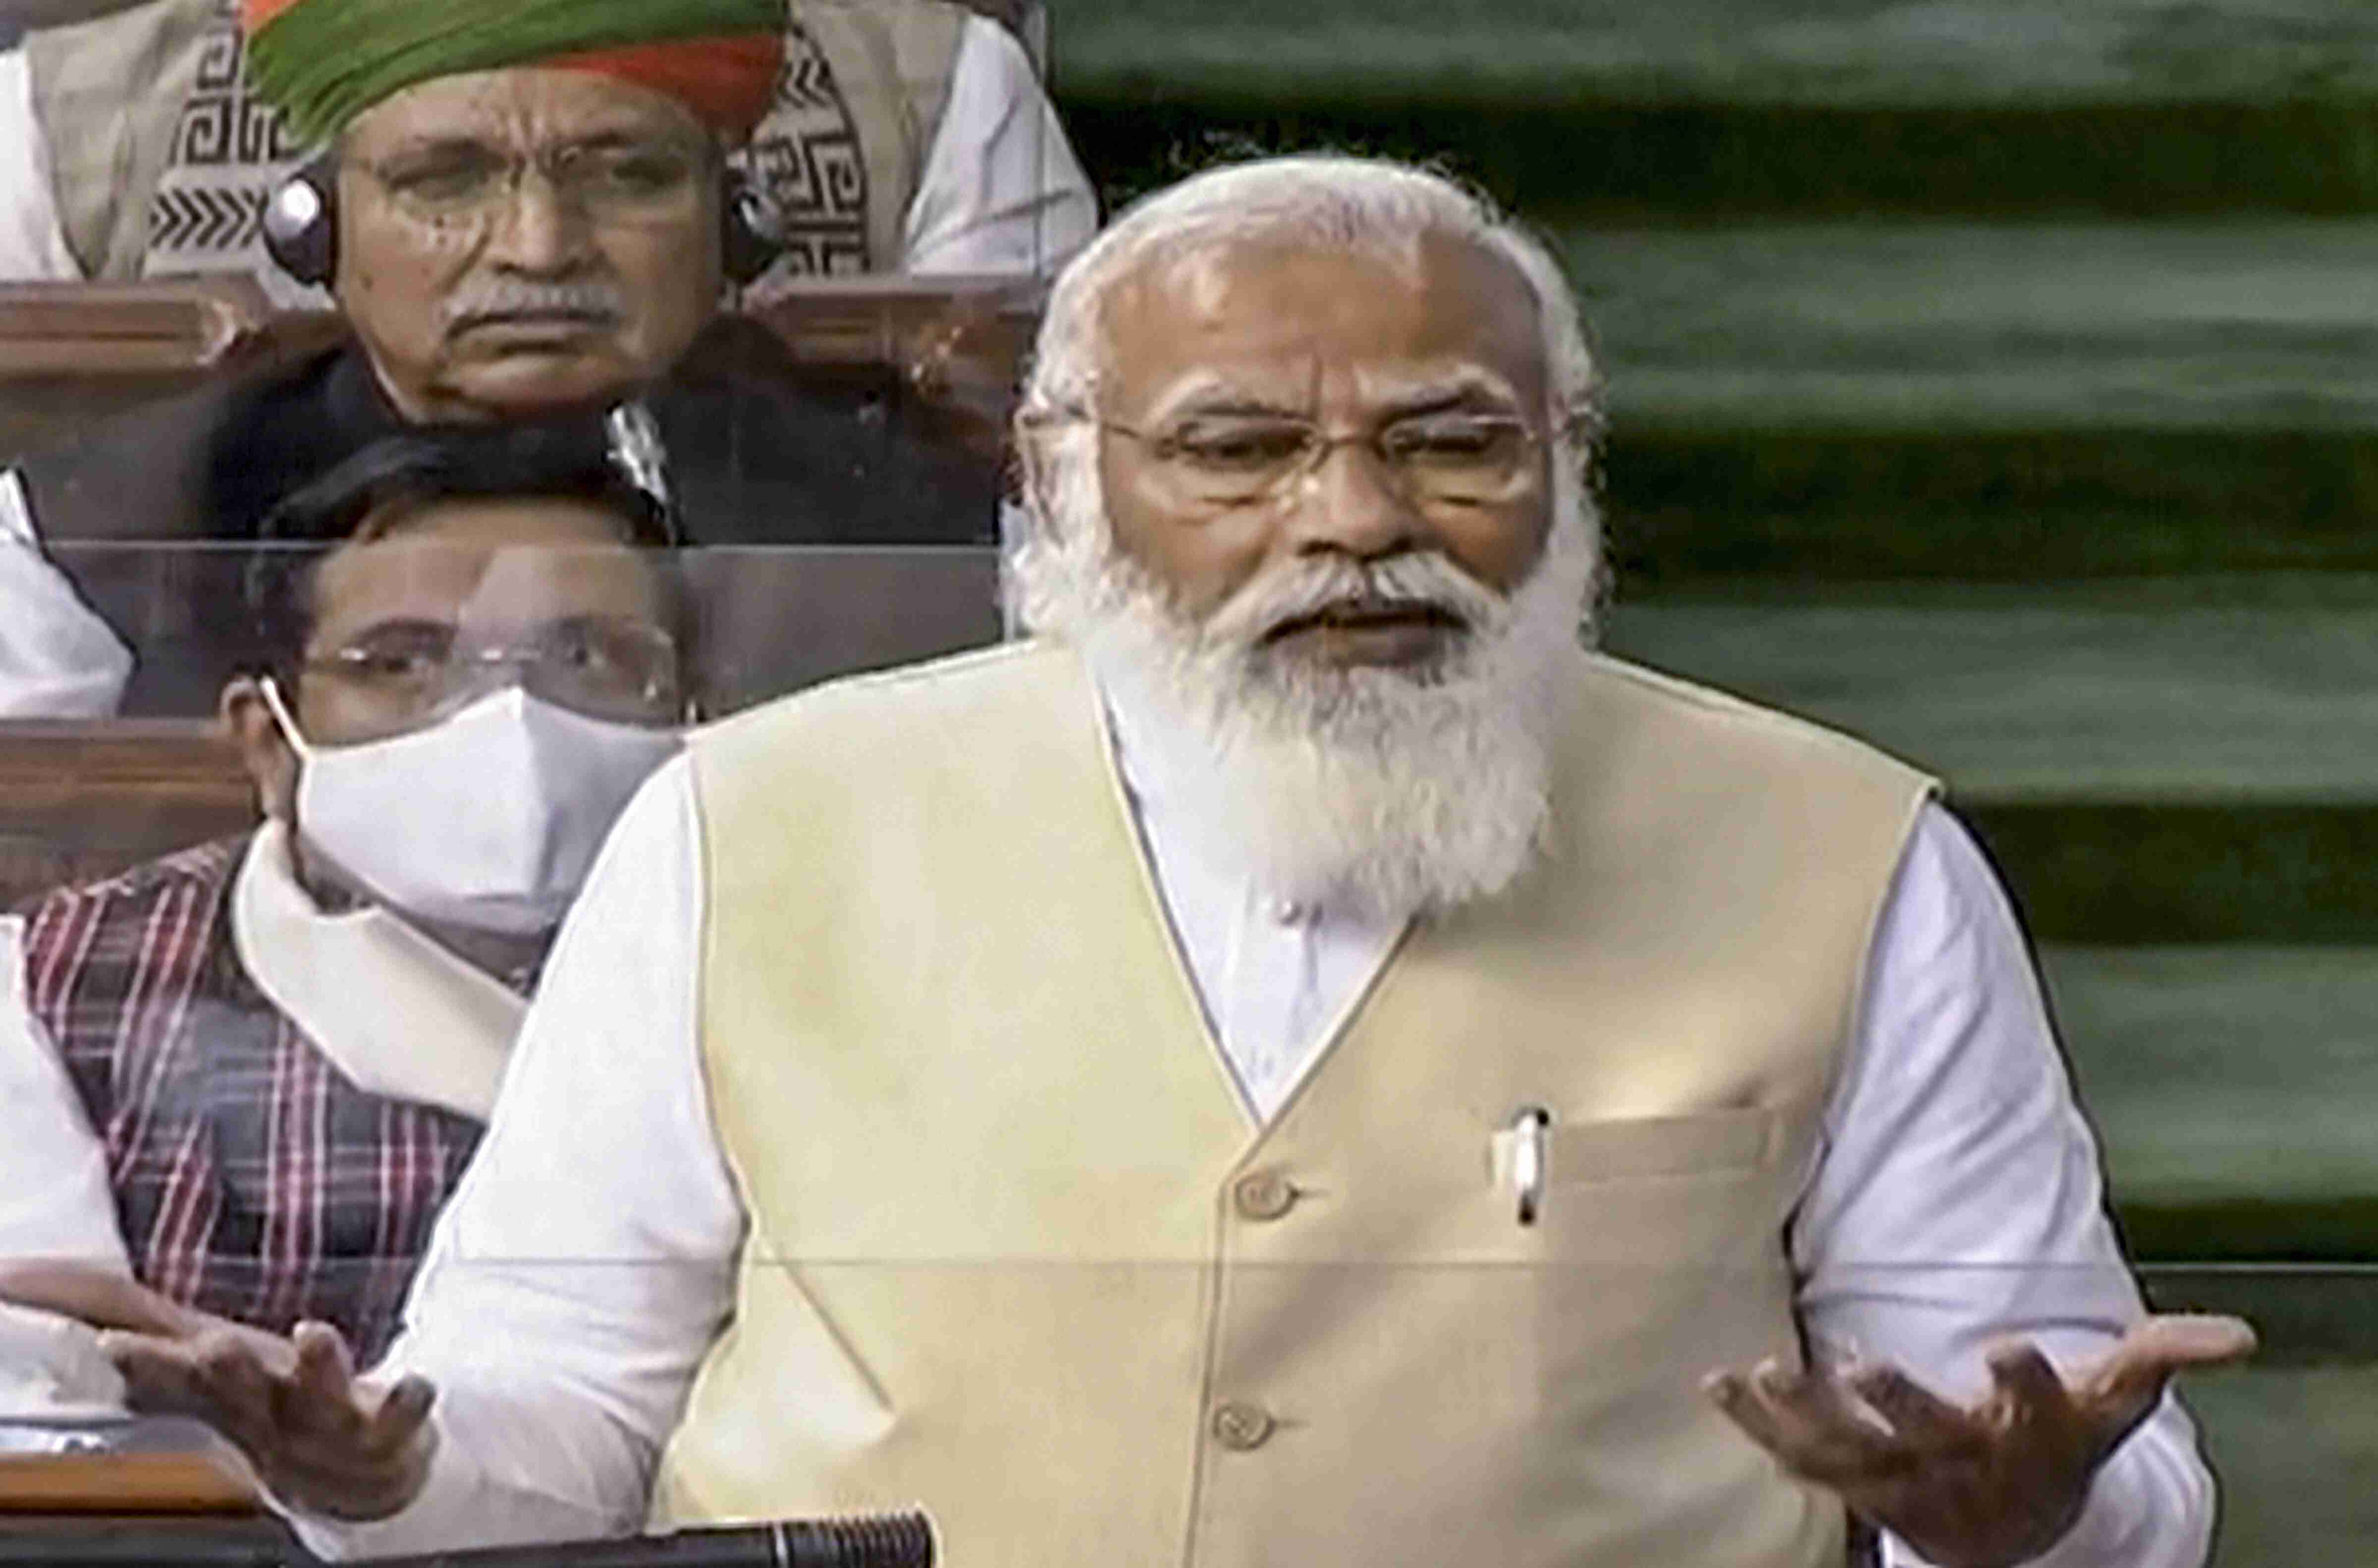 BJP MPs give standing ovation to PM Modi in LS